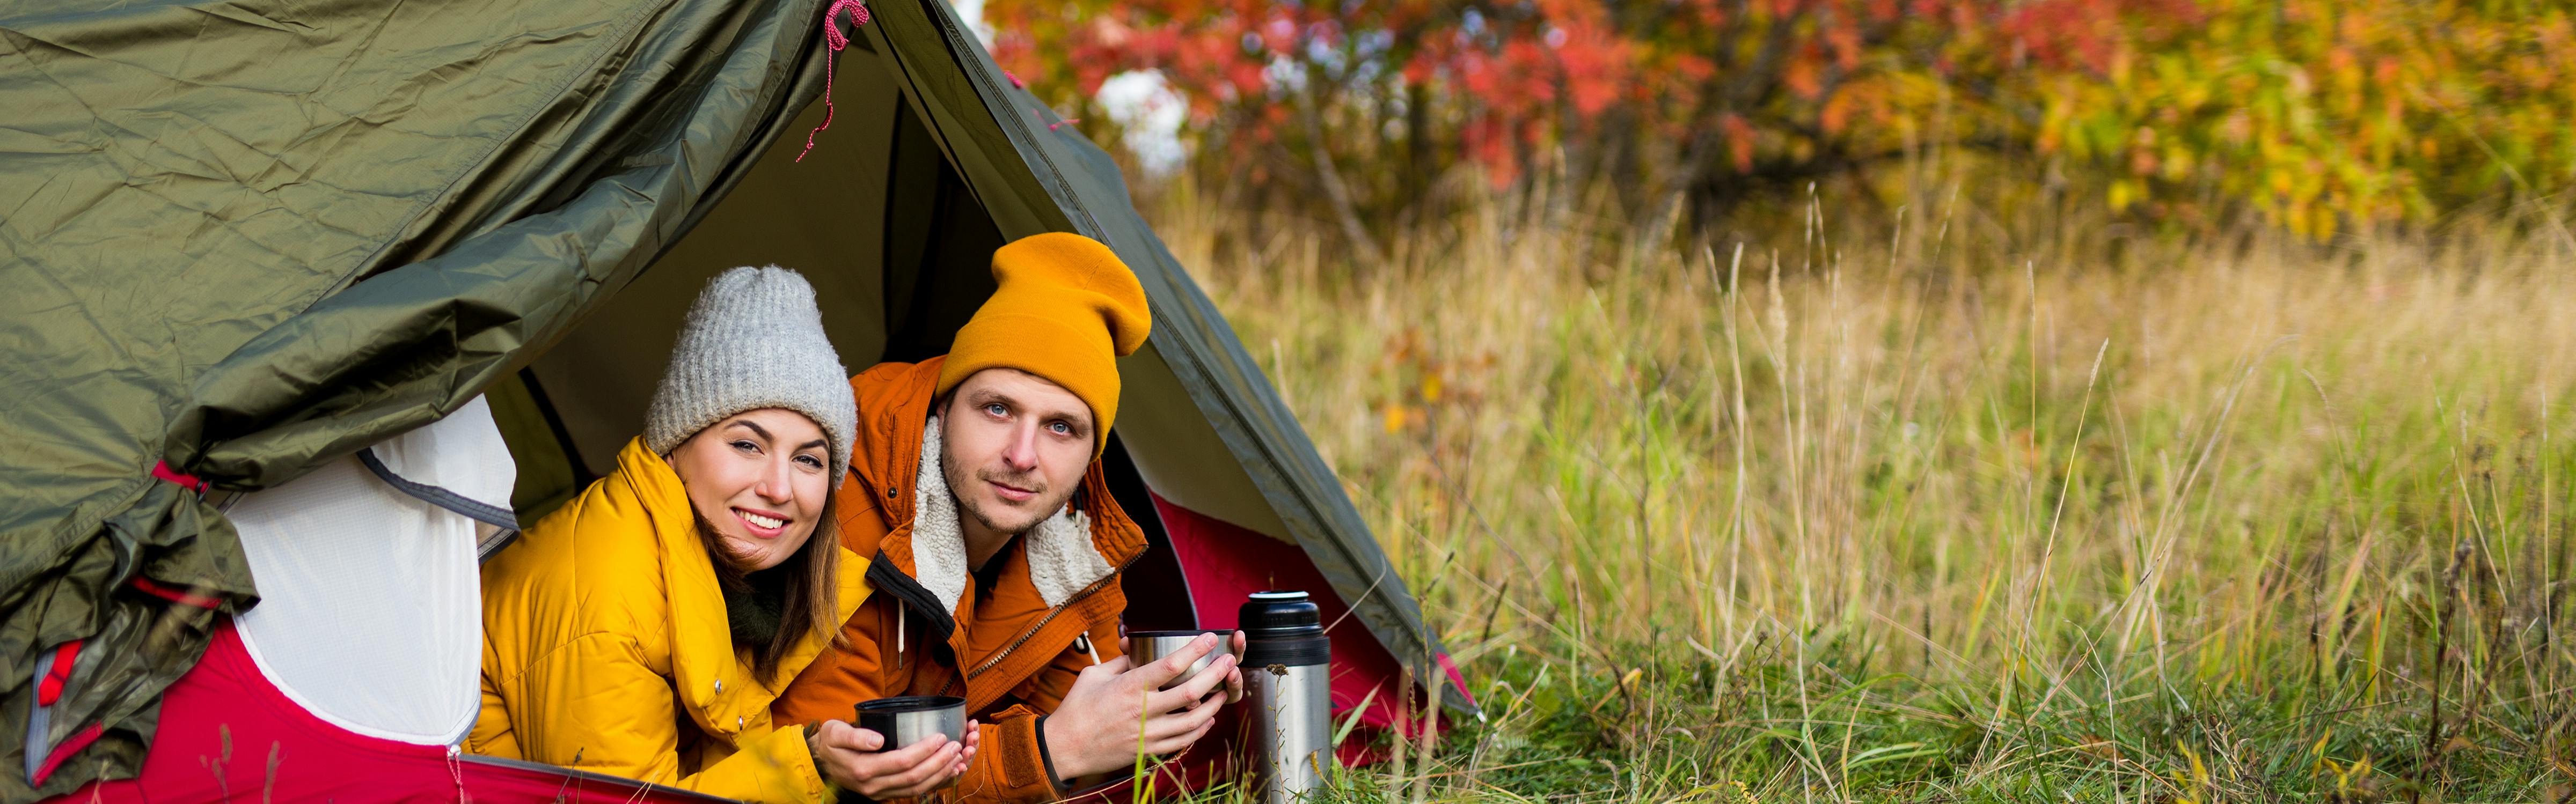 An Expert Guide to Layering for Your Fall Camping Trips